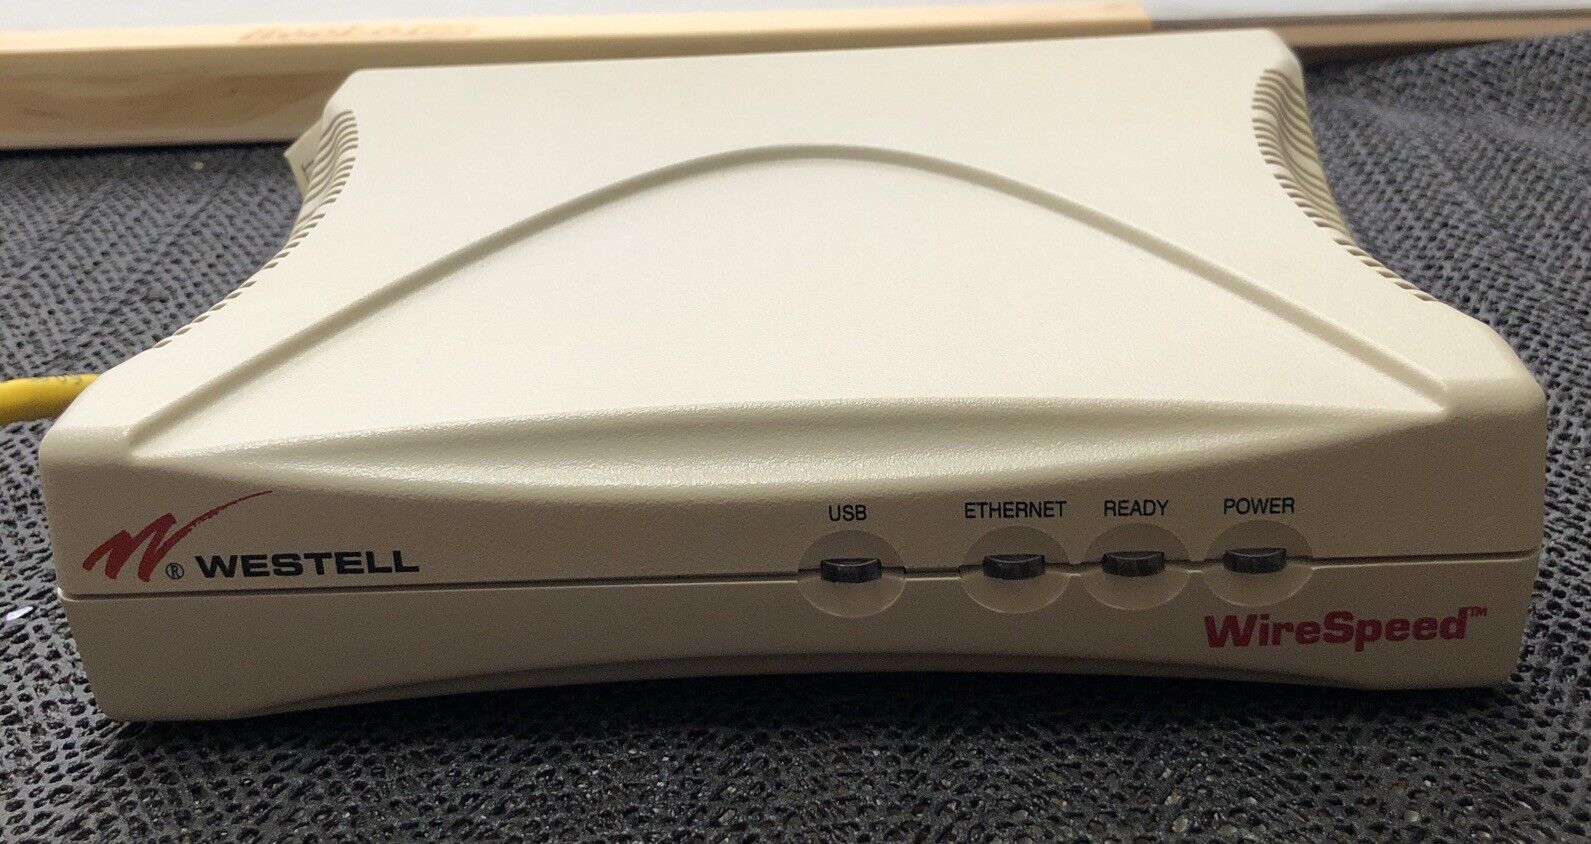 Westell WireSpeed Model B90-210030-04S2 DSL Modem, with Ethernet Cable.